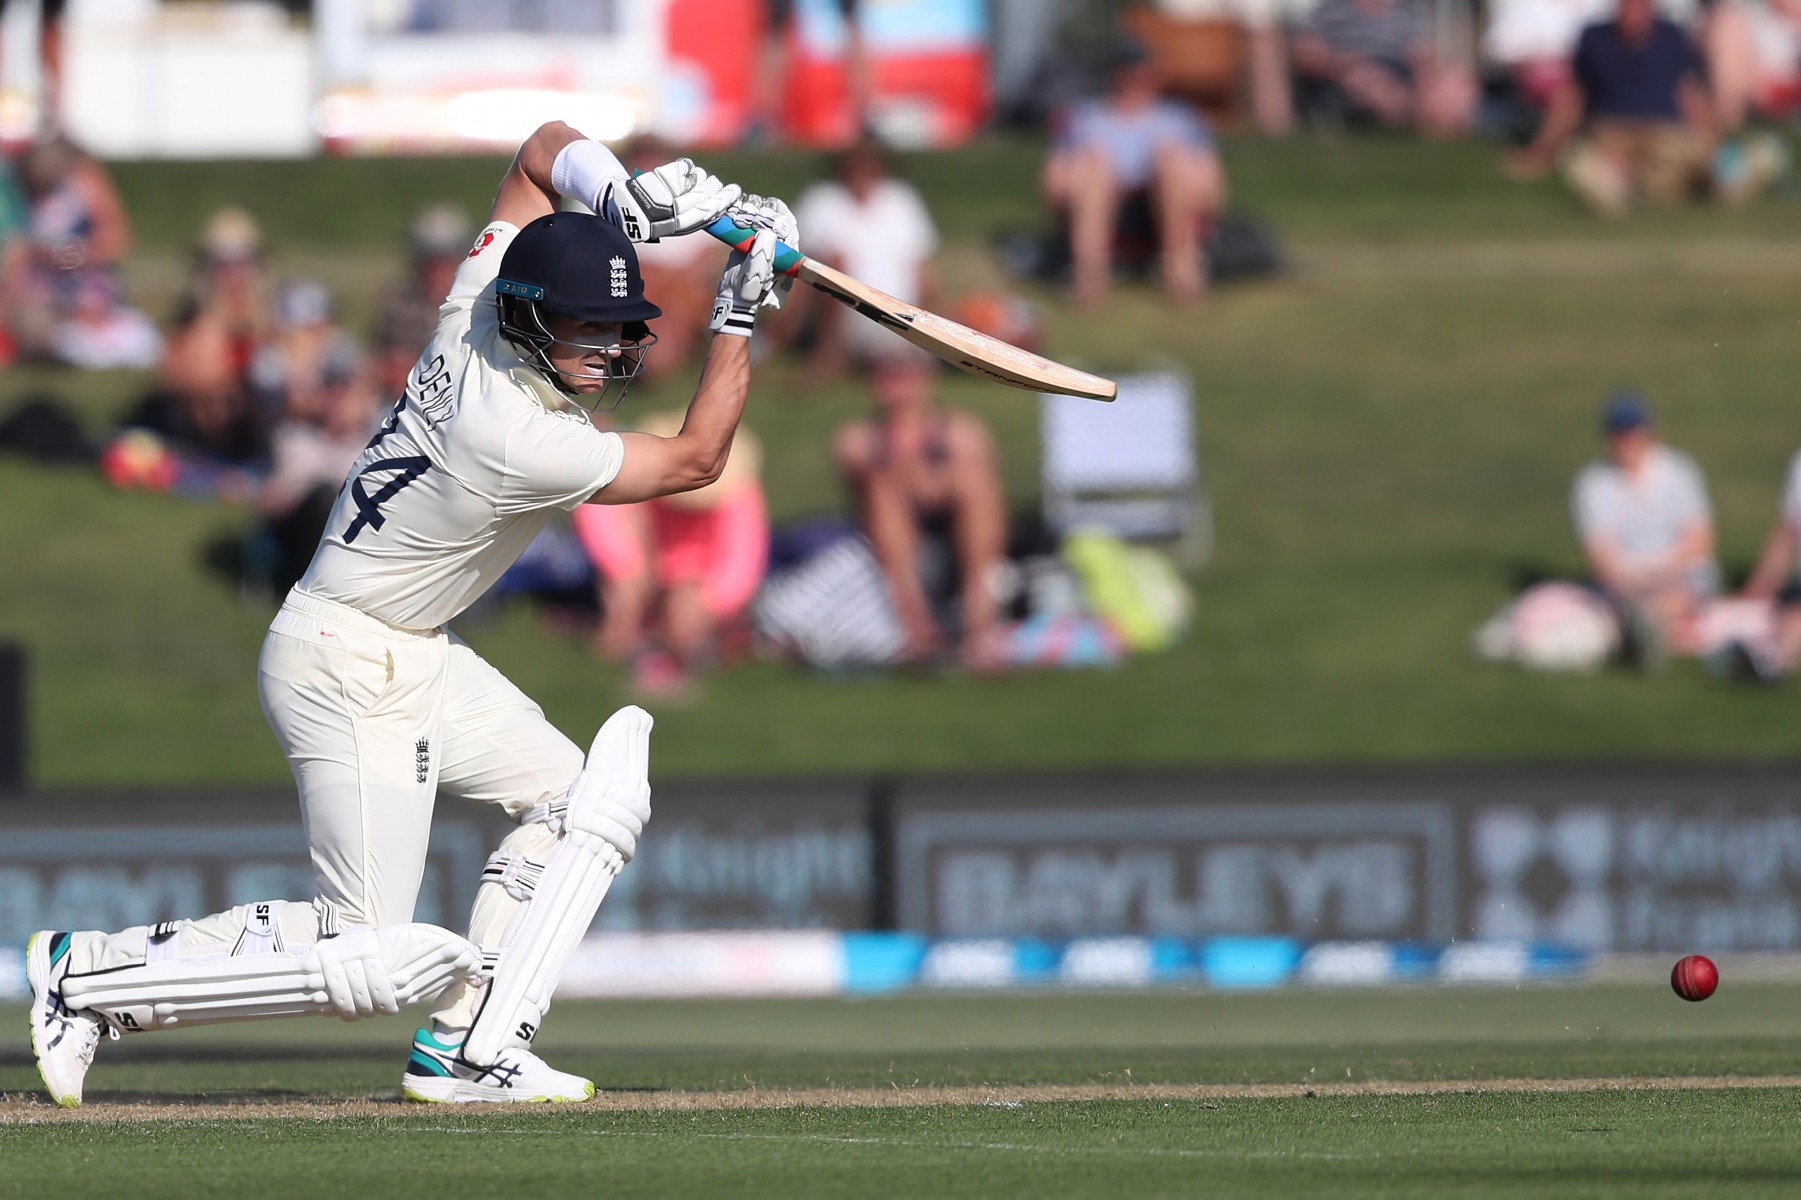 , Ben Stokes and Joe Denly lead the way as England close on 241-4 in hard-fought day one in New Zealand